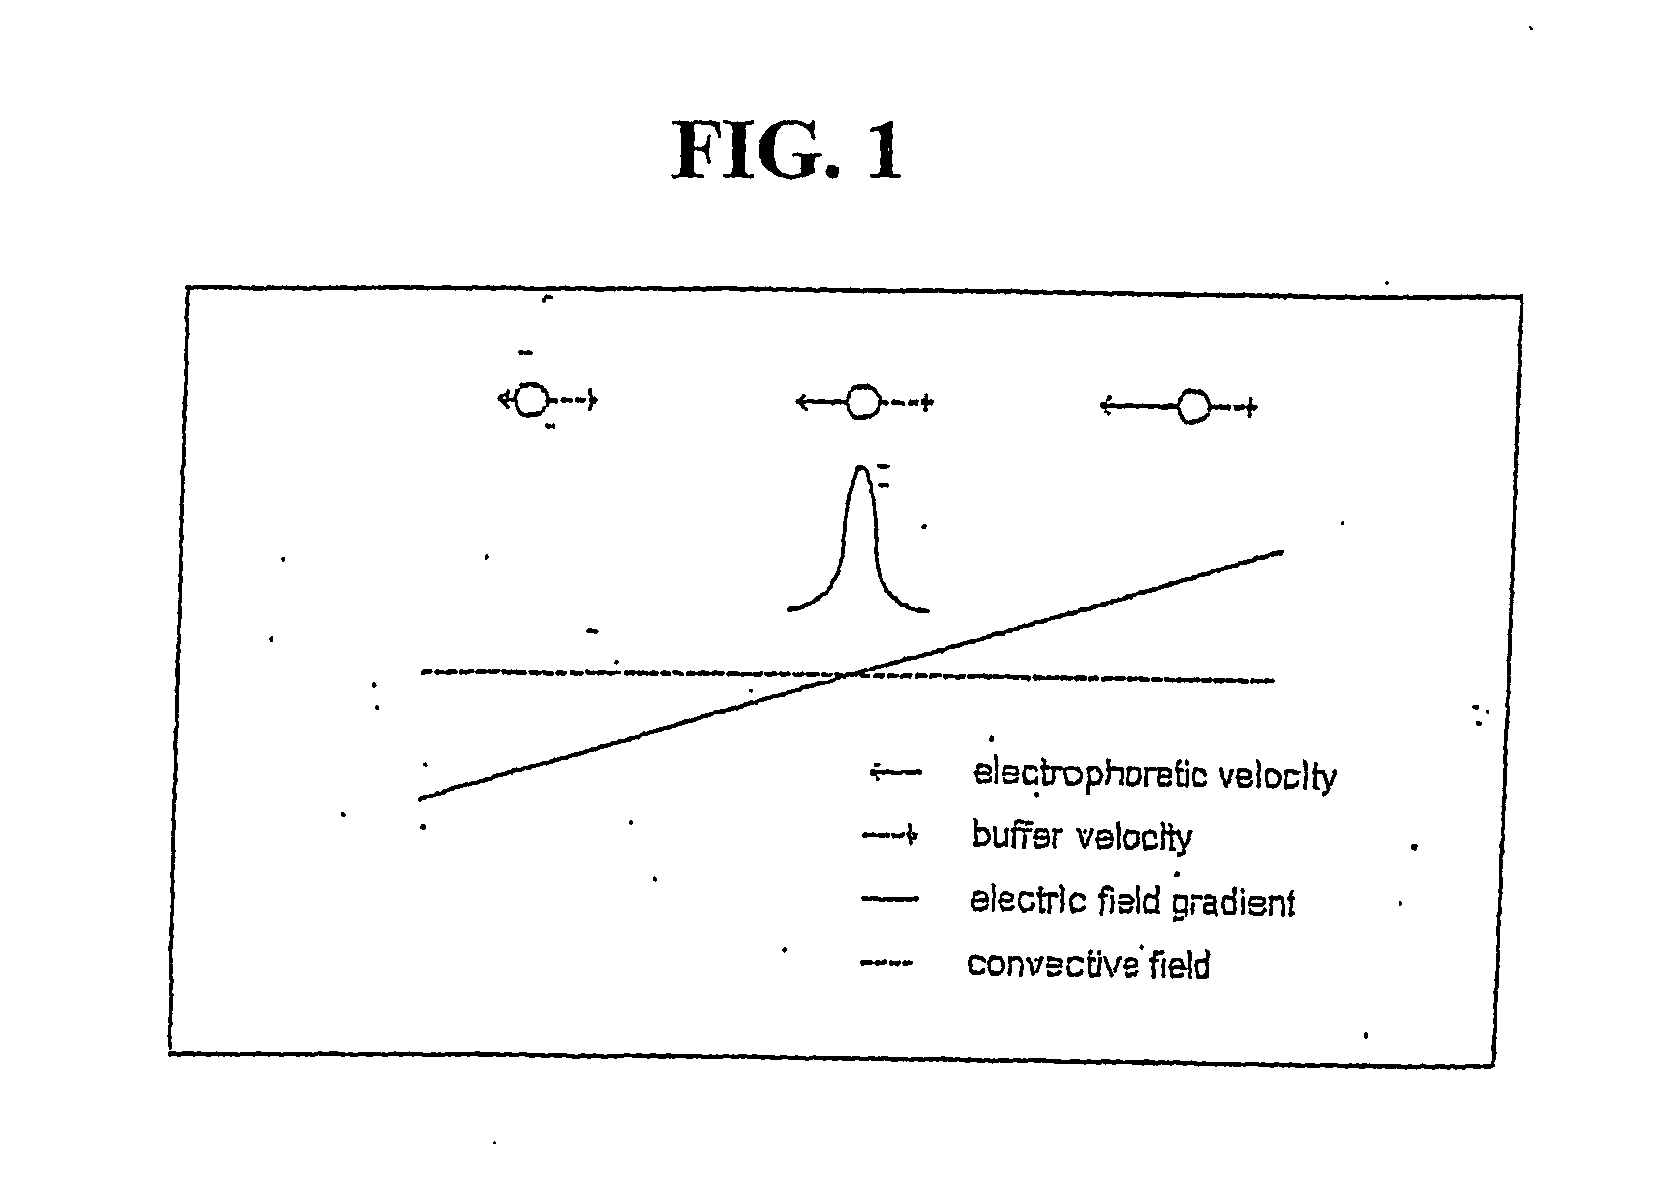 Method and apparatus determining the isoelectric point of charged analyte